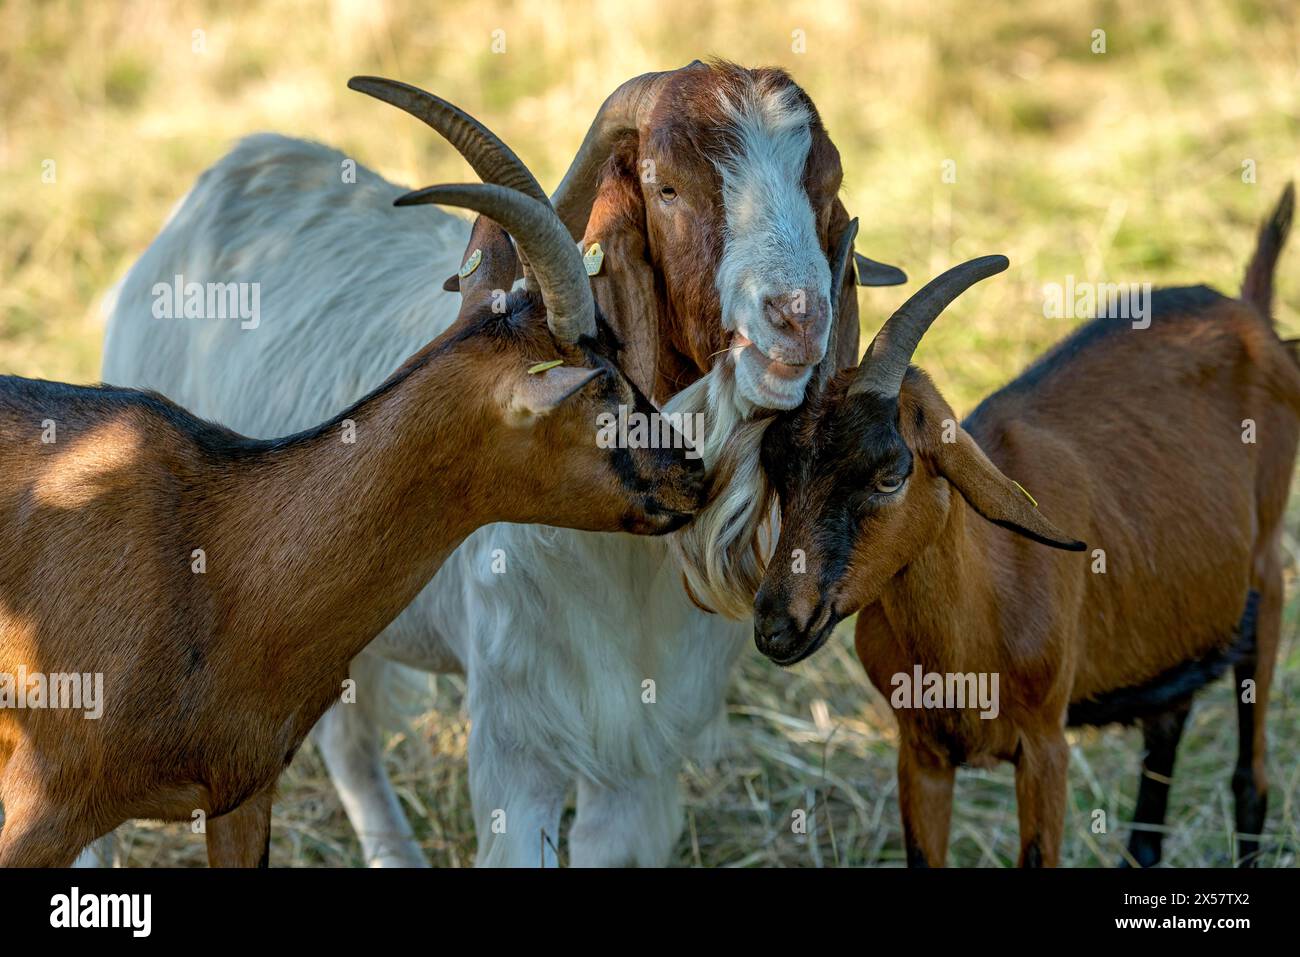 Goats (Capra), Boer goats, goats courting buck with long beard, scent, pasture with dry grass, summit mountain Hoherodskopf, Tertiary volcano Stock Photo